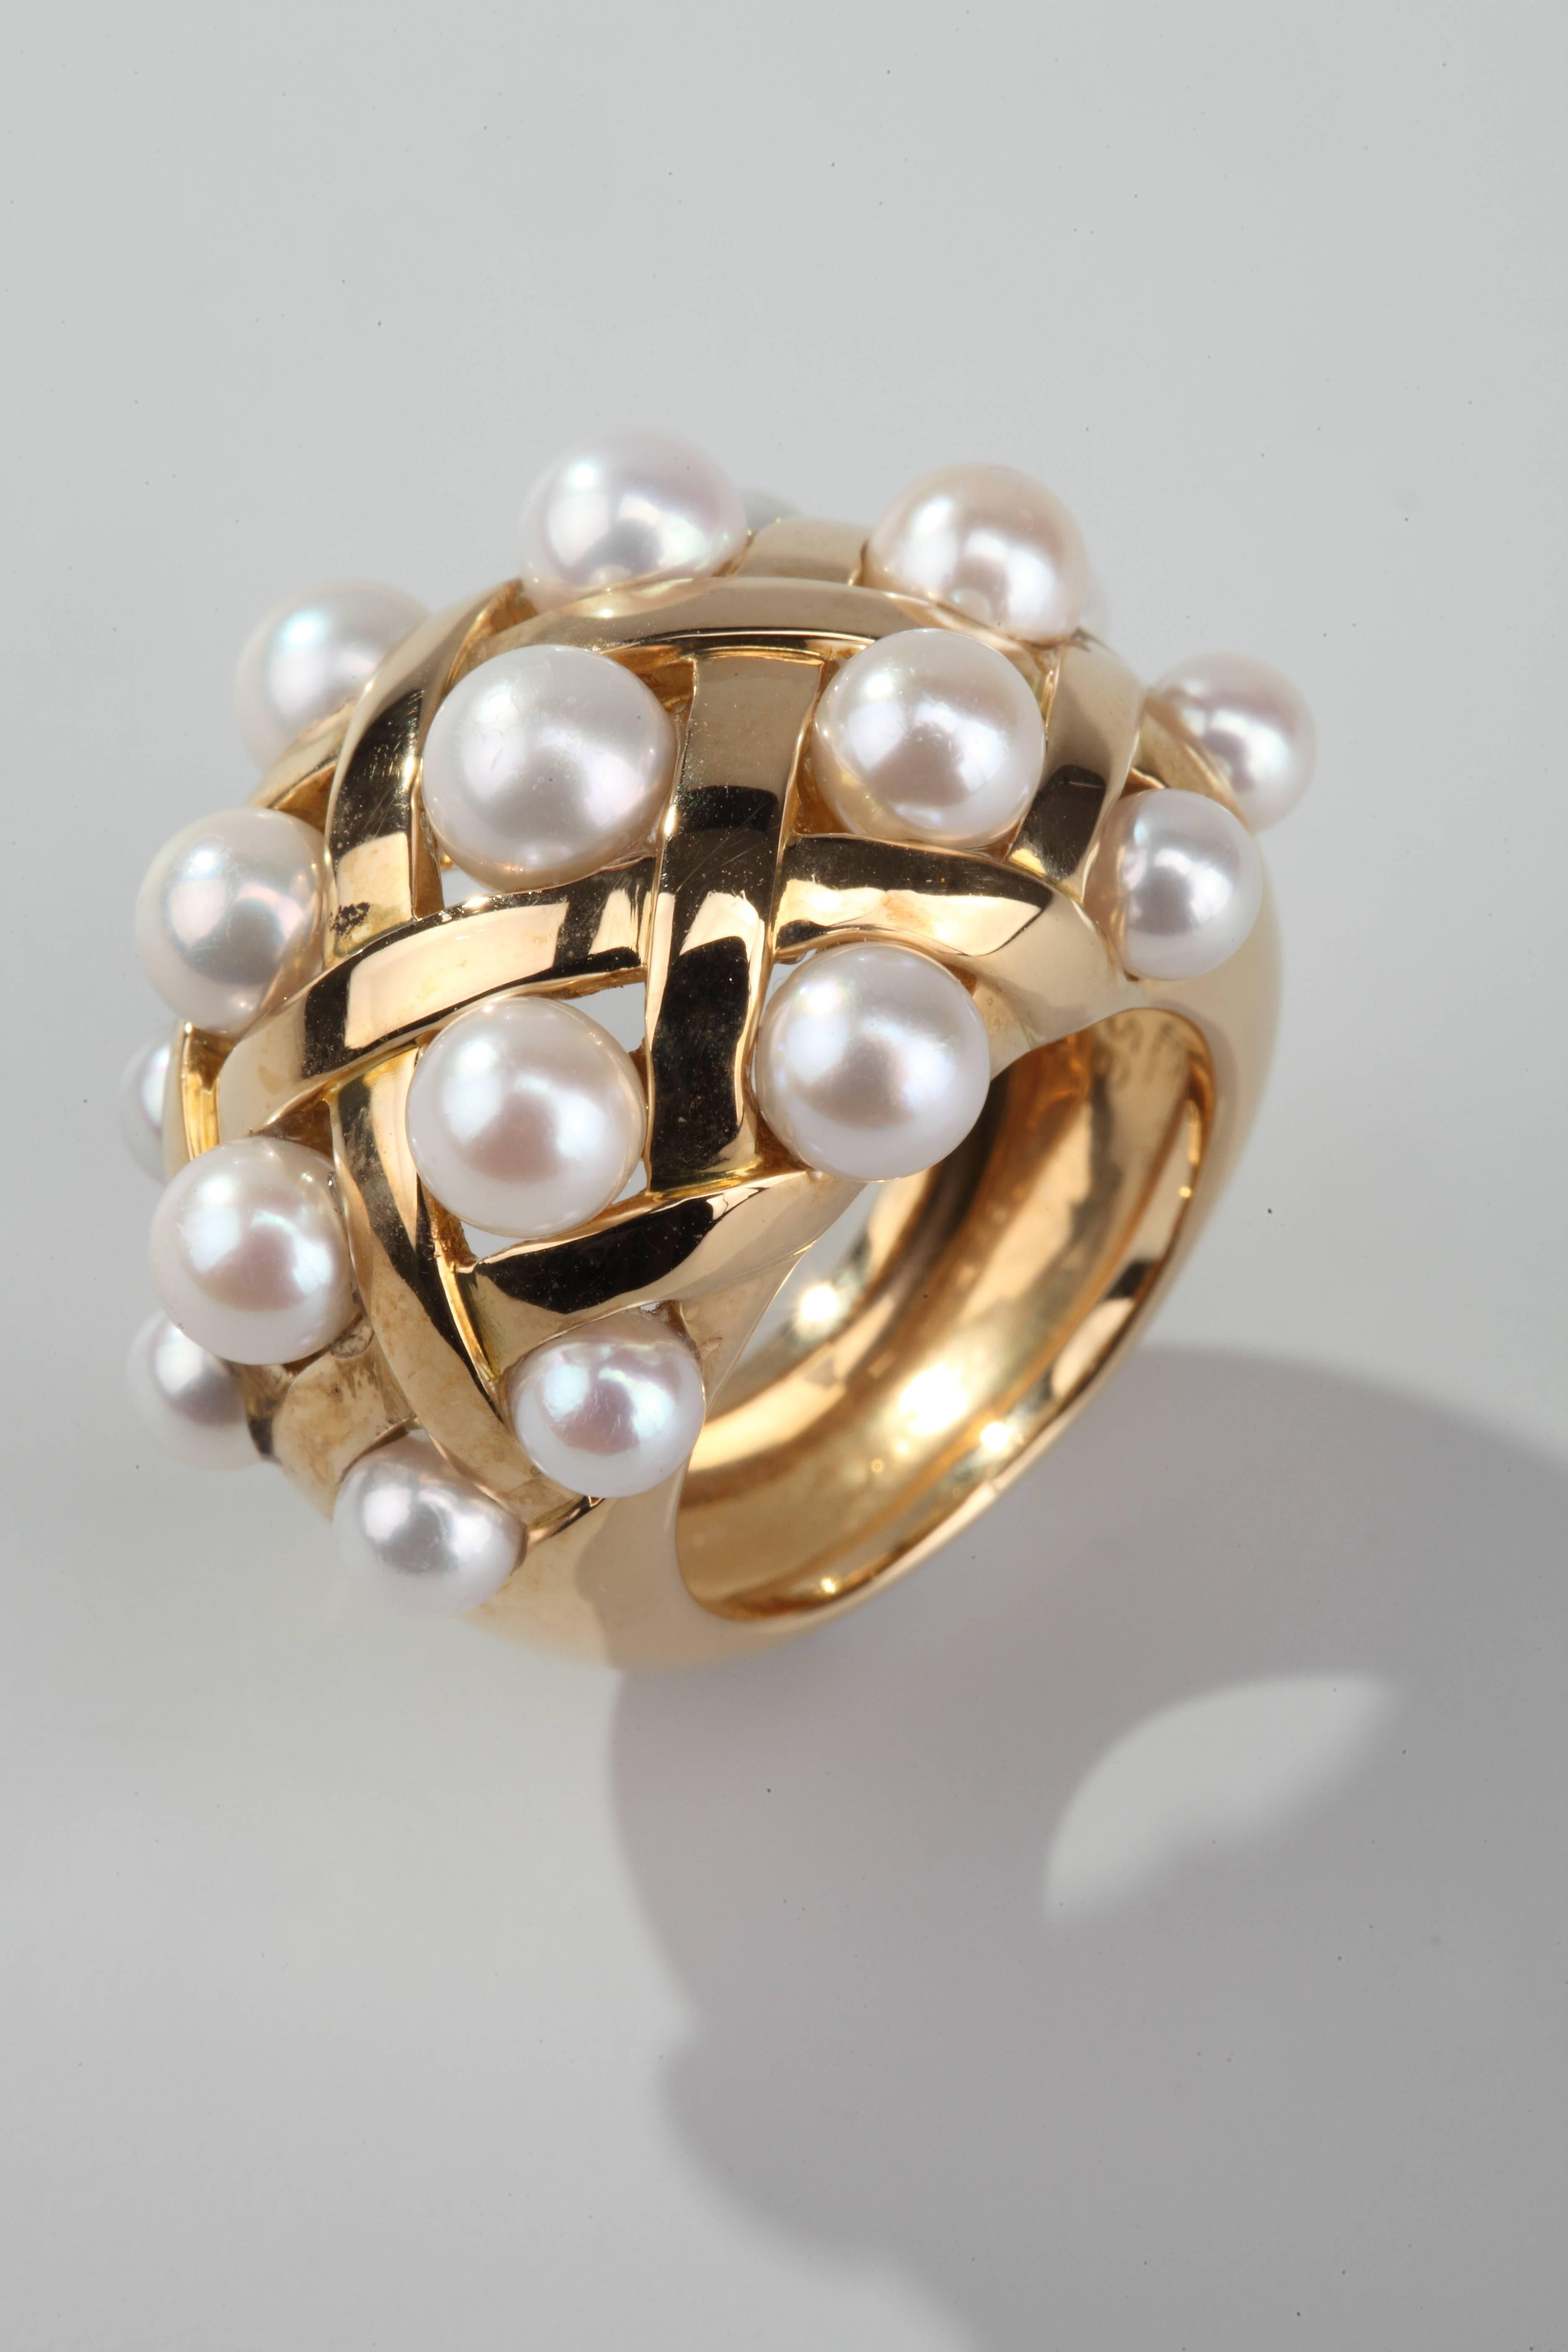 Doomed matelasse design ring set with cultured white pearls on pink gold.
Signed Chanel.
Size : 49 (US : 4.7)